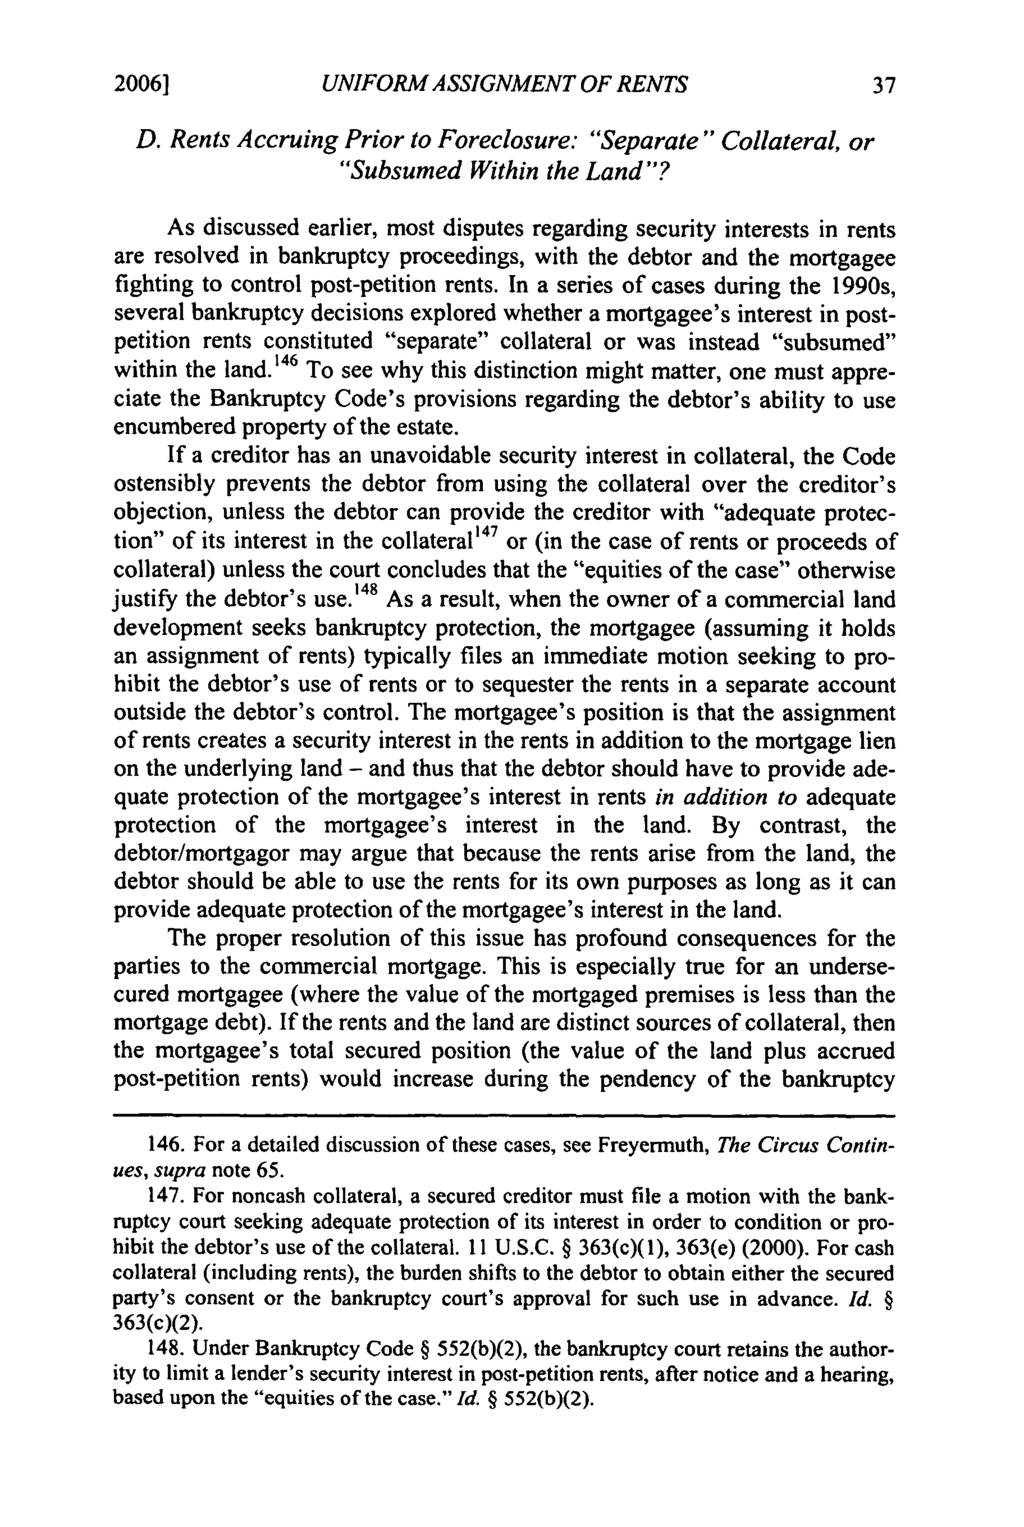 2006] Freyermuth: Freyermuth: Modernizing Security in Rents UNIFORM ASSIGNMENT OF RENTS D. Rents Accruing Prior to Foreclosure: "Separate" Collateral, or "Subsumed Within the Land"?